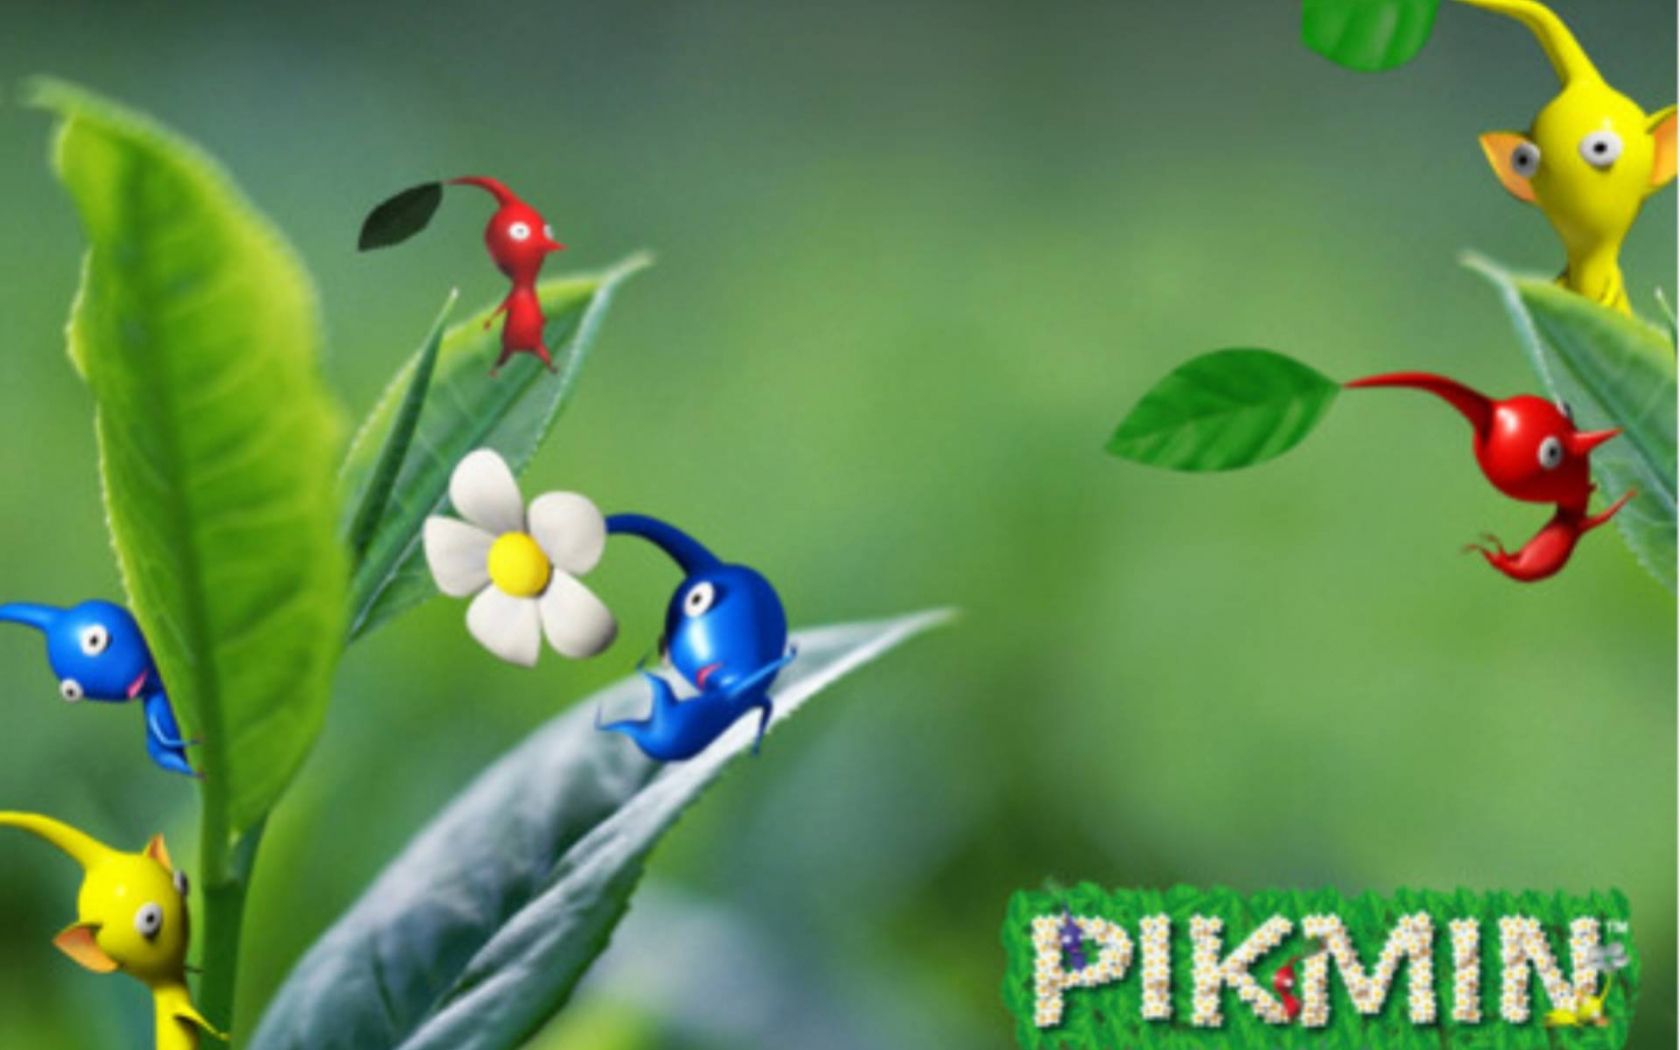 Free download Pikmin 3 Wallpaper in HD GamingBoltcom Video Game News Reviews [1920x1329] for your Desktop, Mobile & Tablet. Explore 3 Wallpaper. Mass Effect 3 Wallpaper, Witcher 3 Wallpaper 1920X Dark Souls 3 Wallpaper